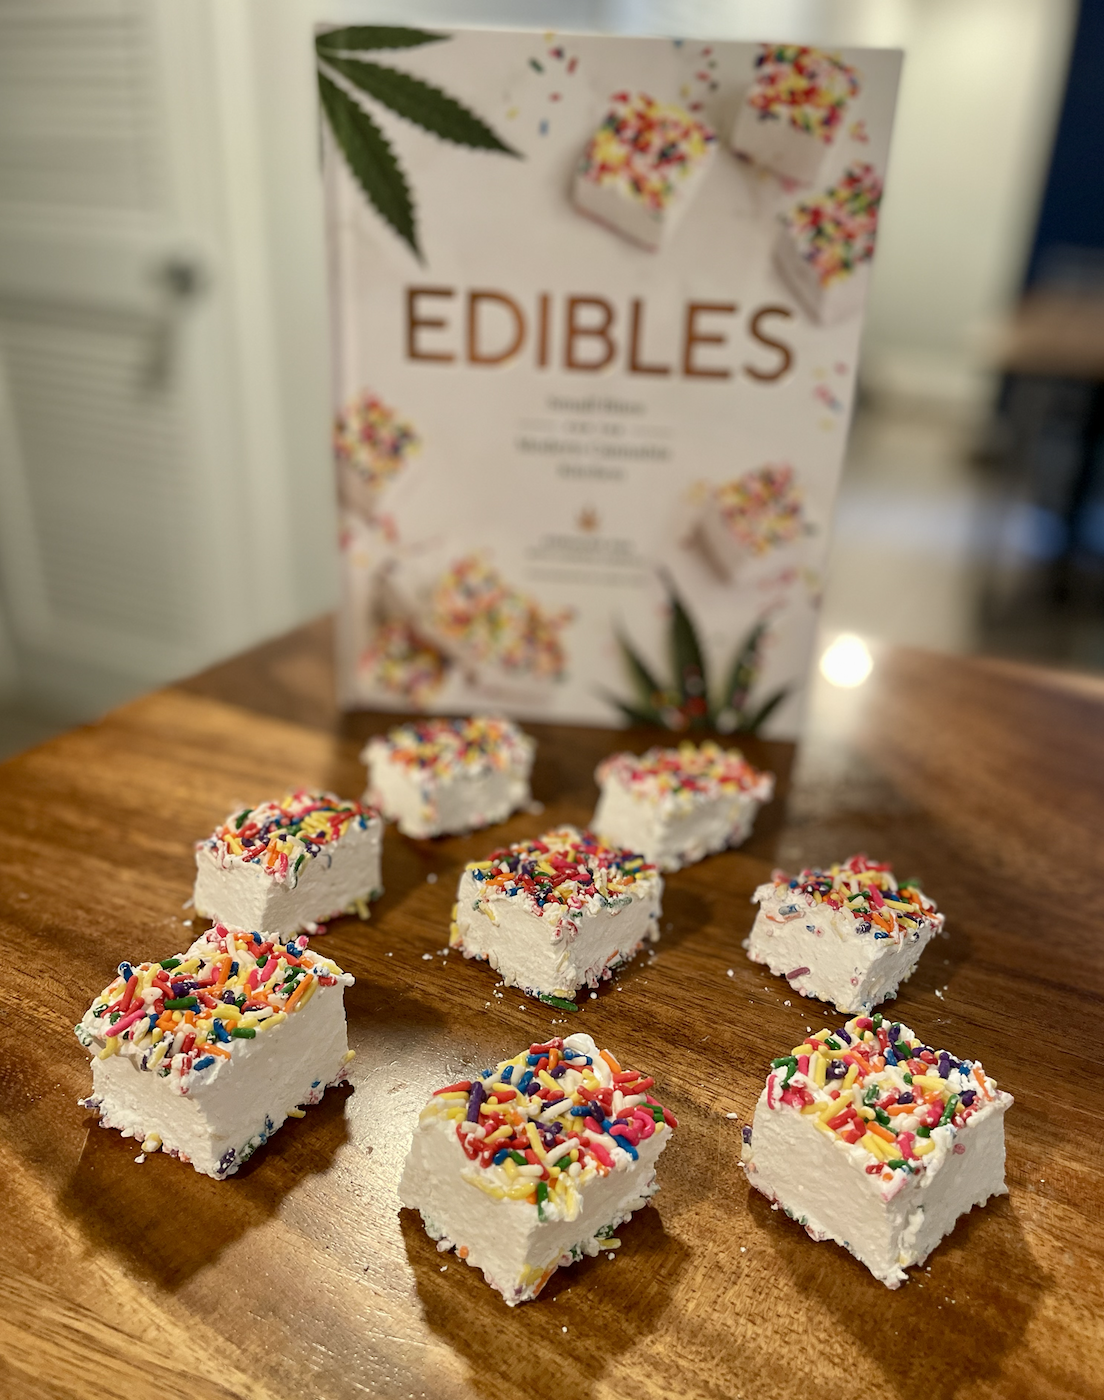 Photo of square homemade marshmallows topped with rainbow sprinkles on a wooden table next to the cookbook Edibles